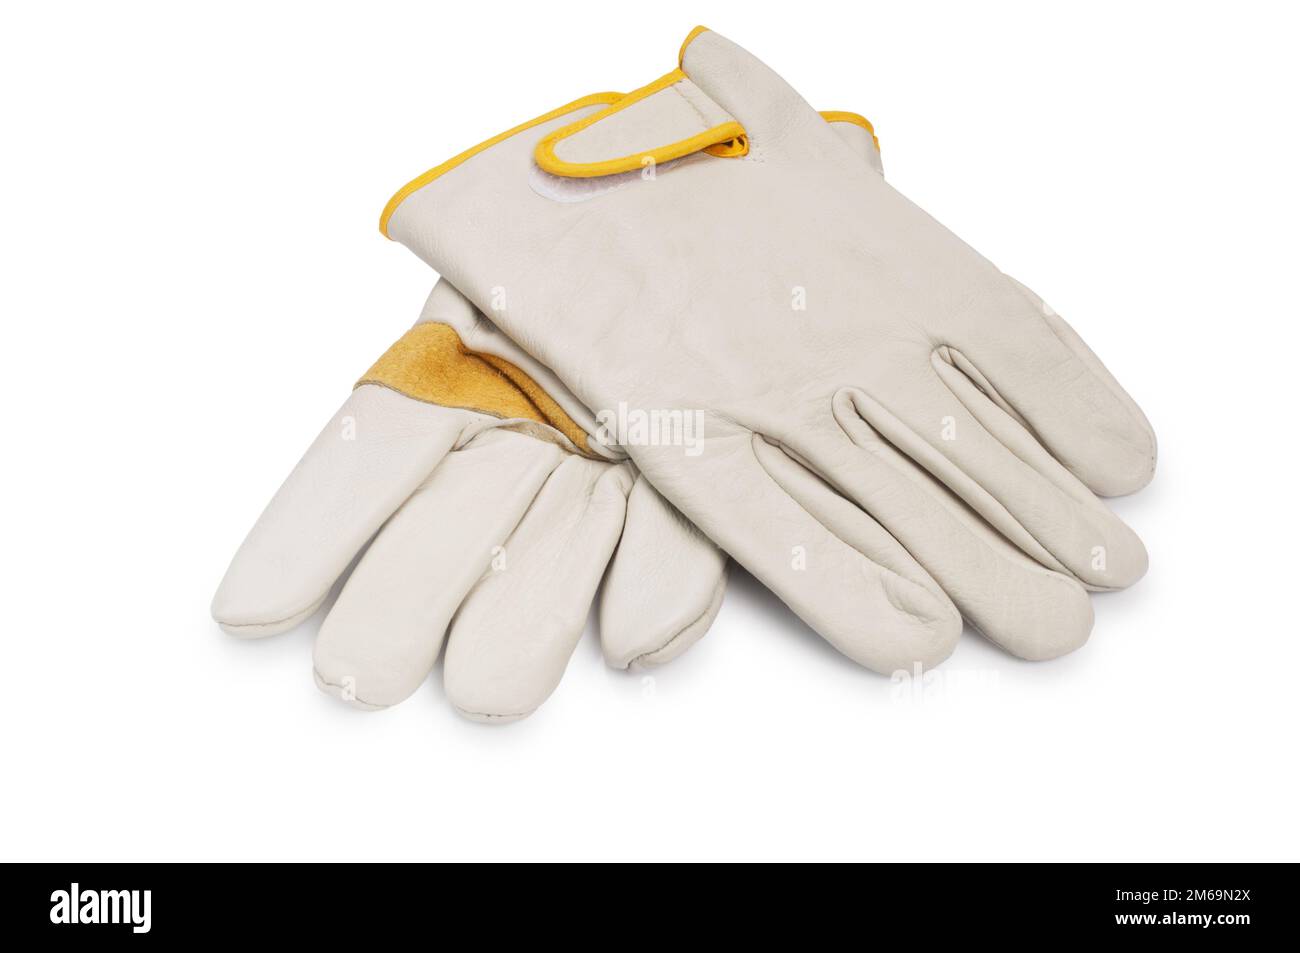 Studio shot of a pair of new leather gardening gloves cut out against a white background - John Gollop Stock Photo